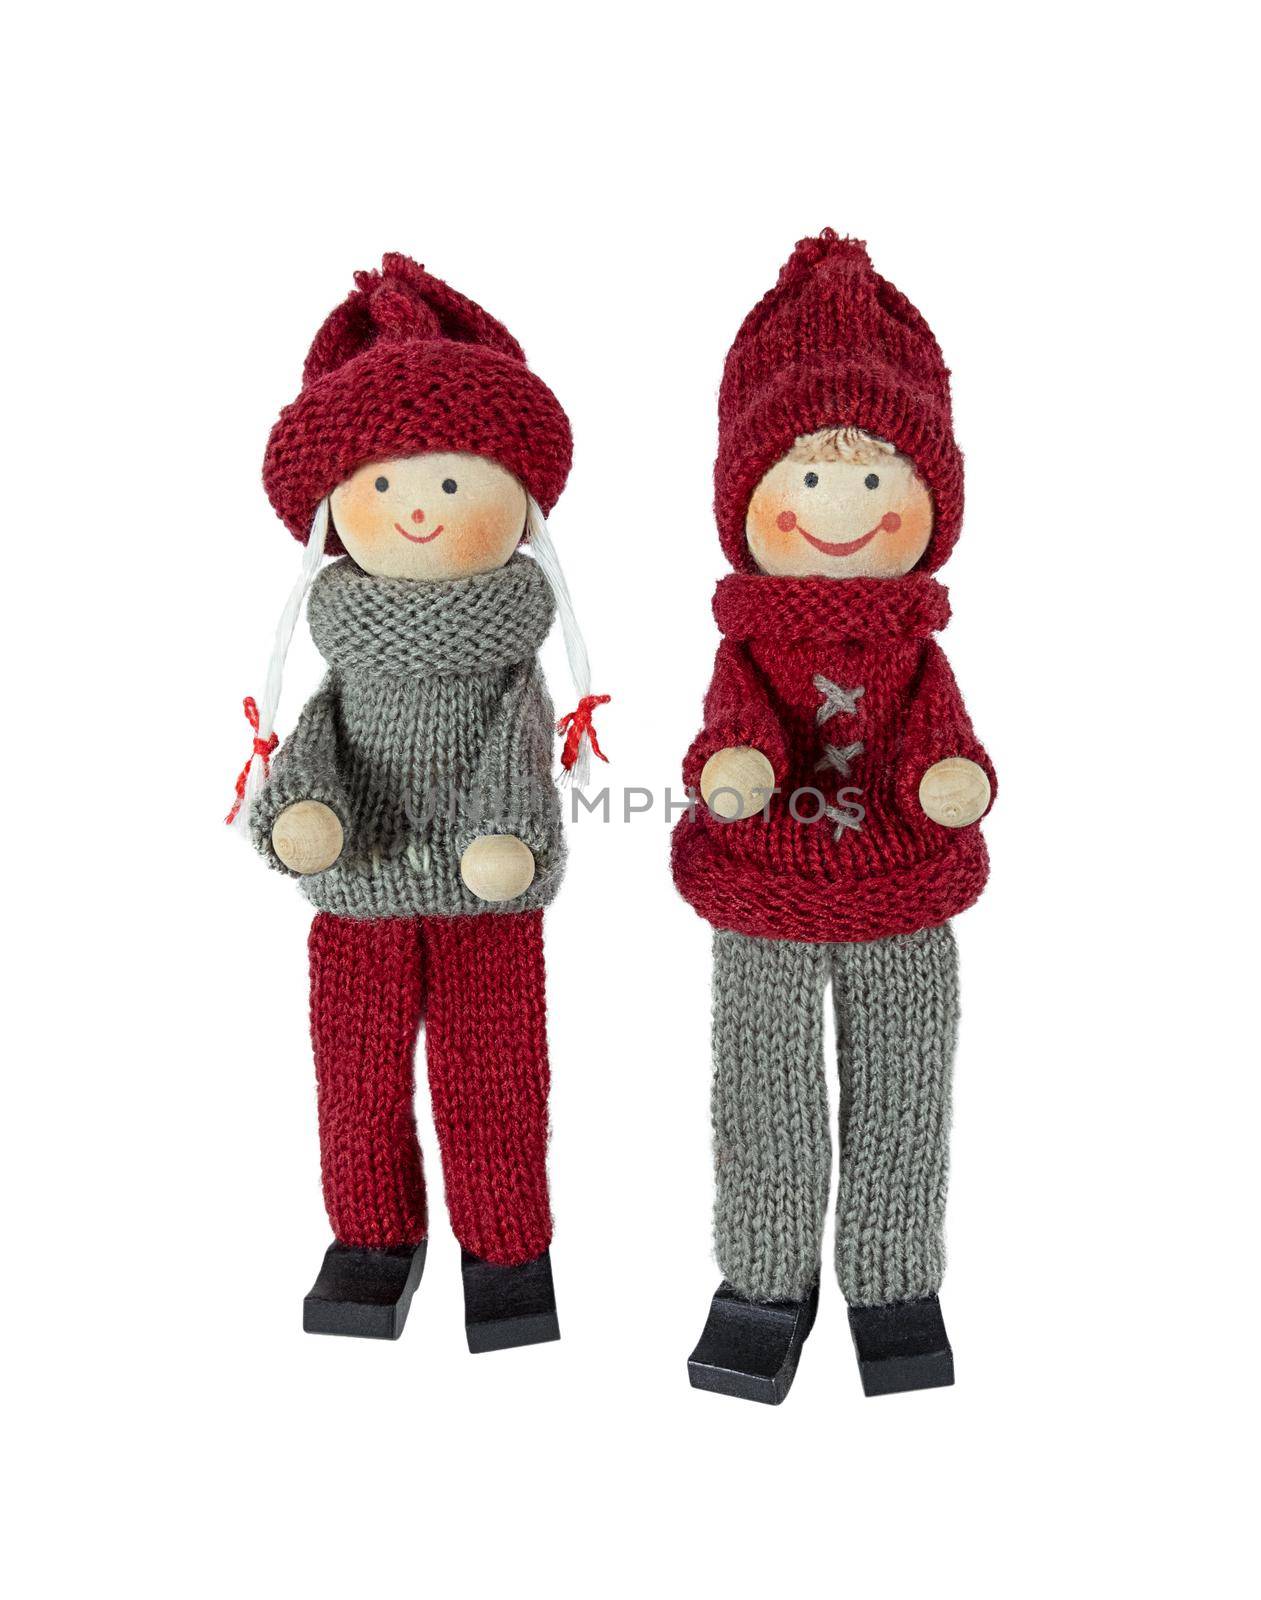 Knitted Christmas dolls of girl and boy isolated on a white background.